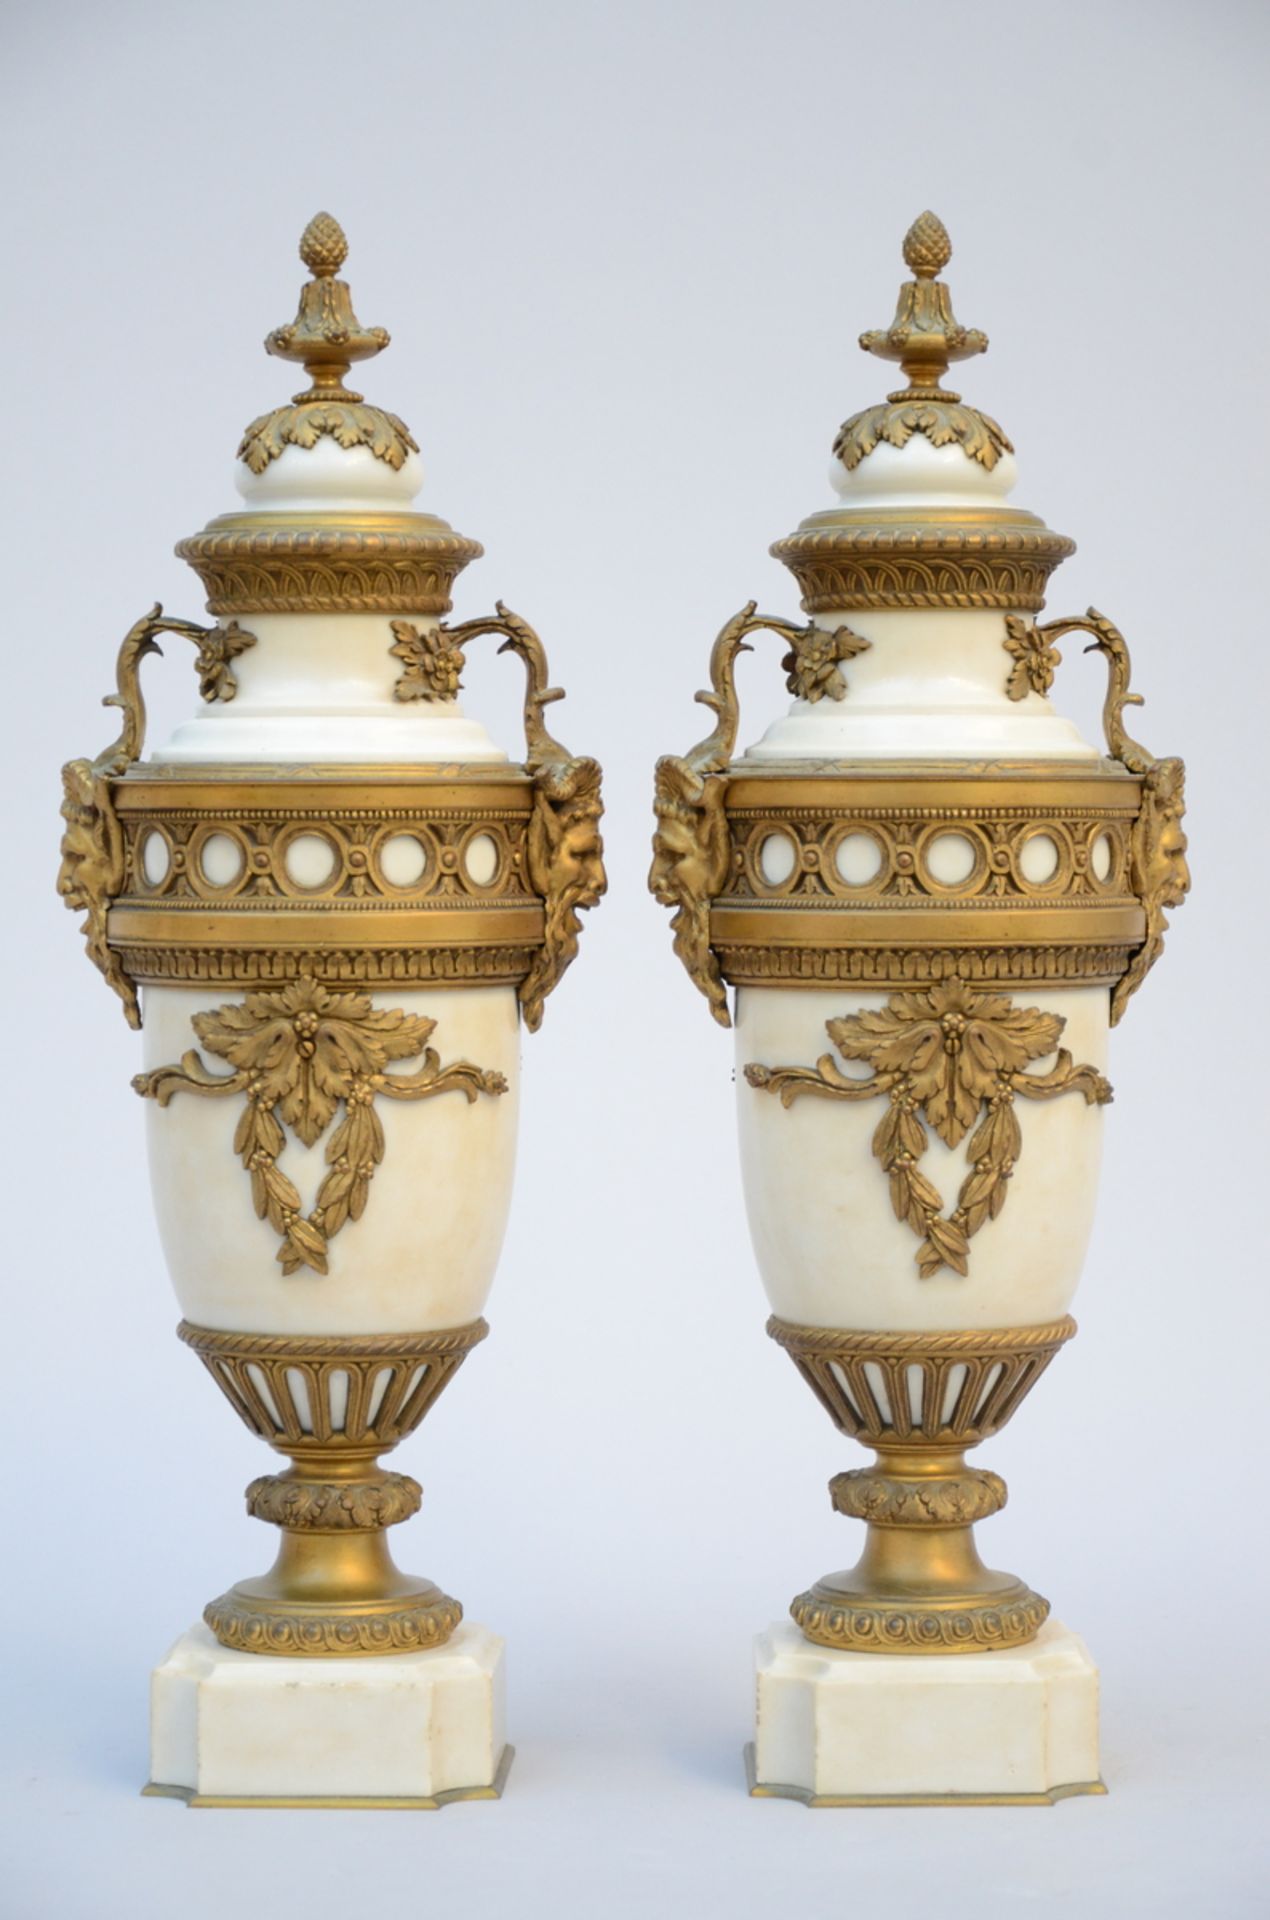 A pair of Louis XVI vases in white marble with bronze fittings (57 cm)